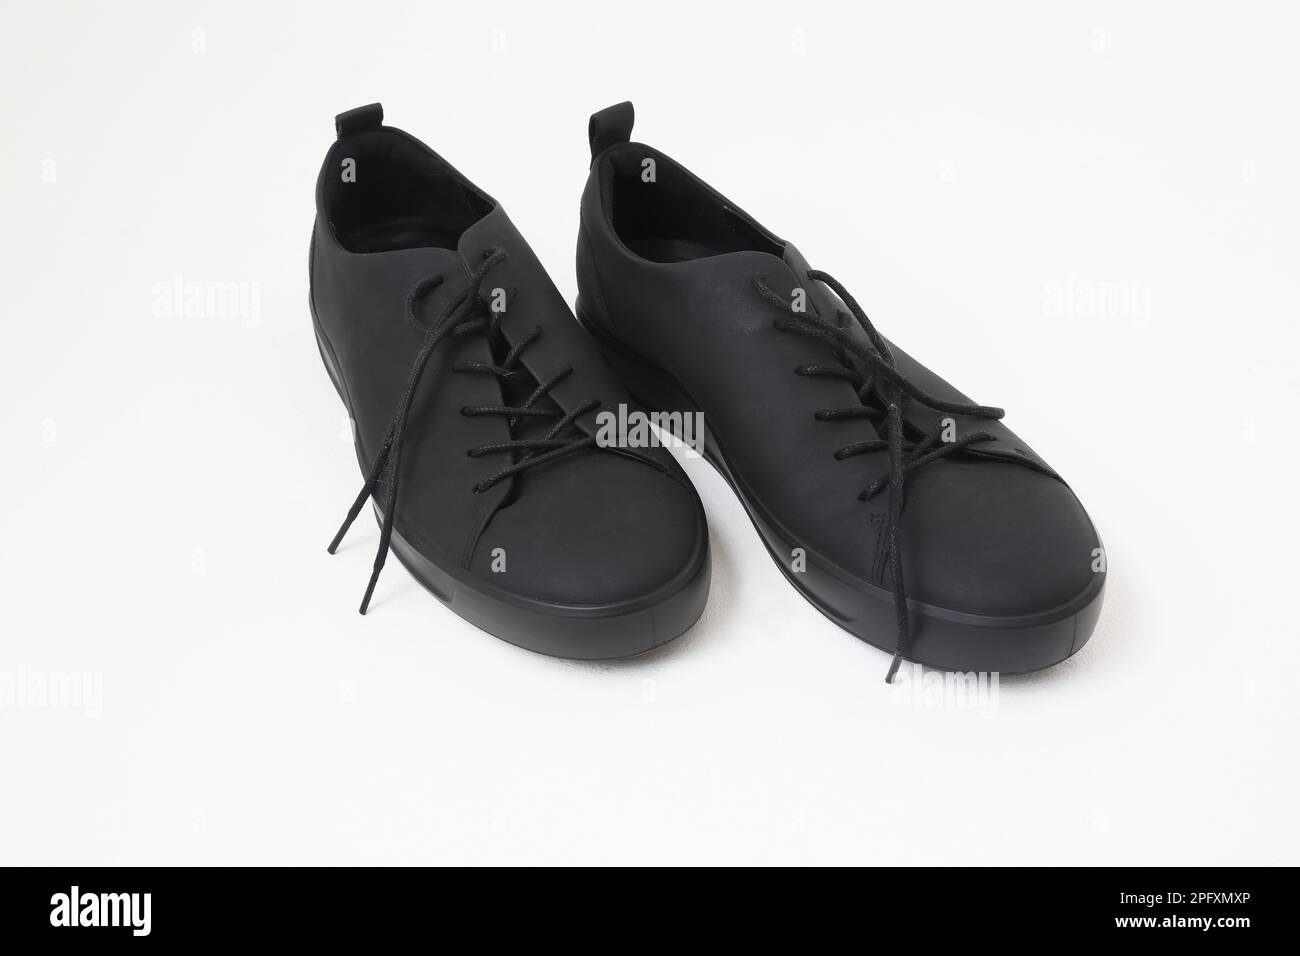 A Pair of Men's Formal Black Leather Ecco Lace up Shoes Stock Photo